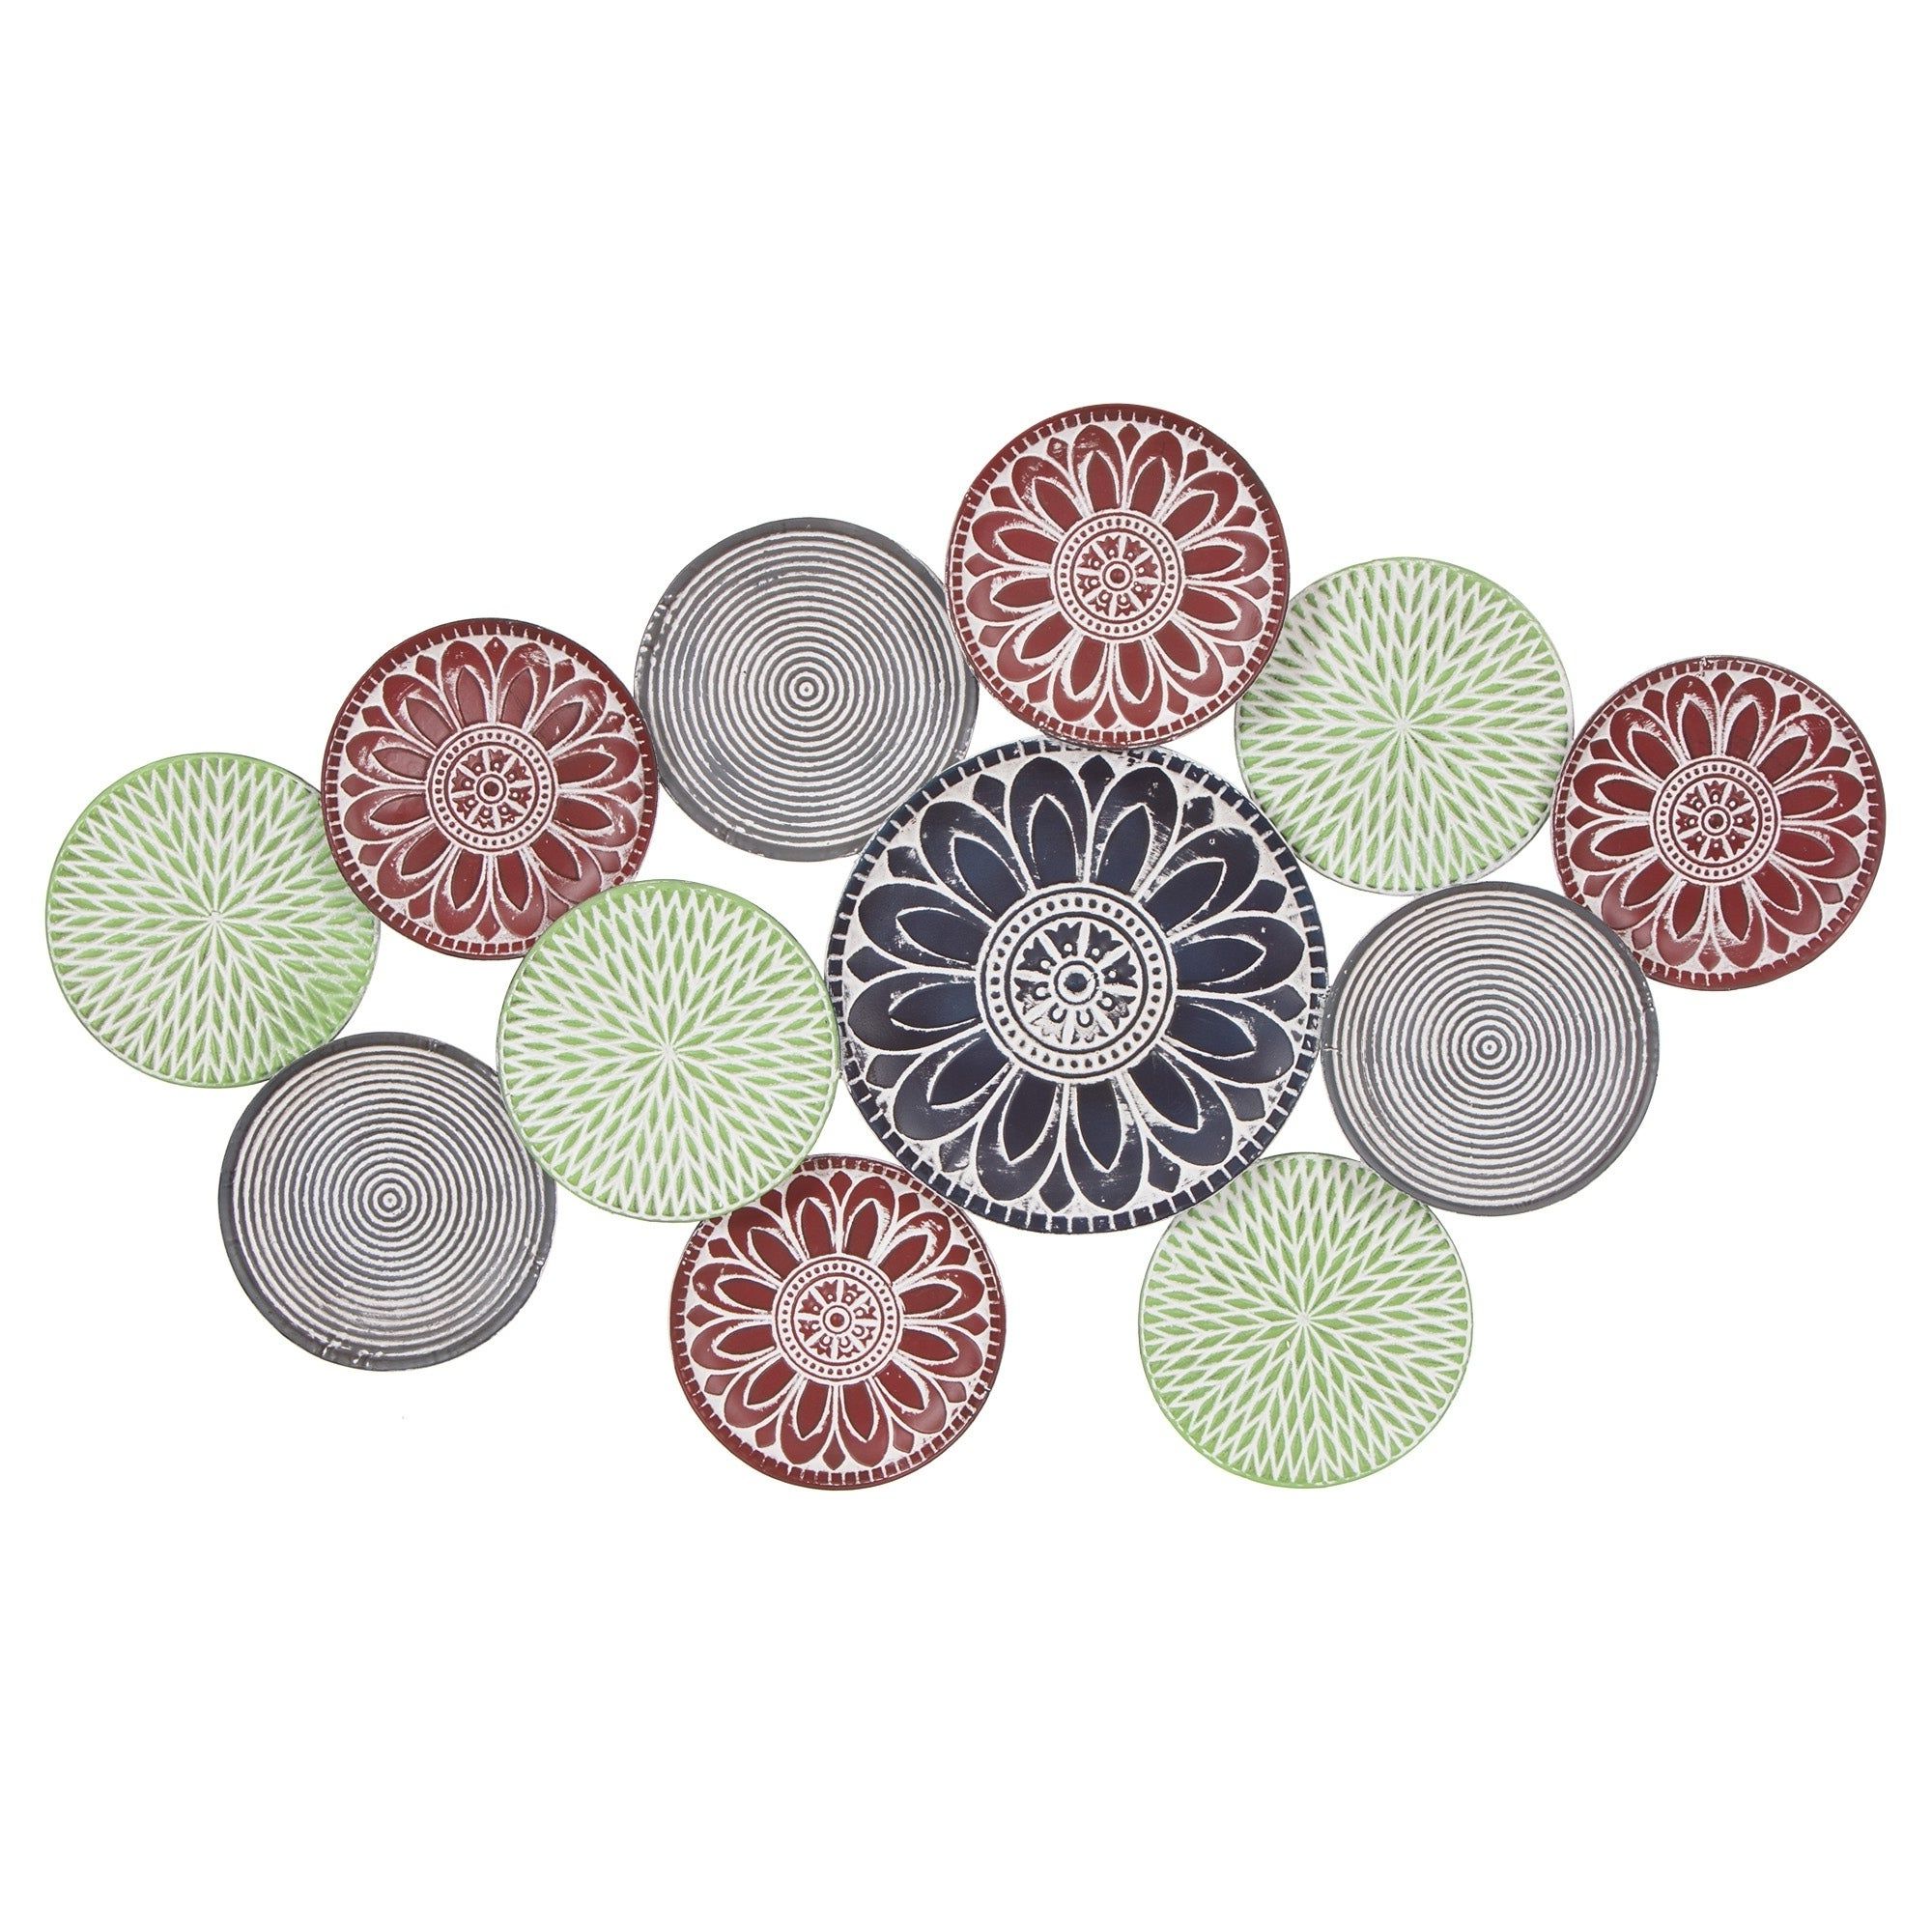 Current Scattered Metal Italian Plates Wall Decor With Shop 27x46 Textured Multicolor Enamel Painted Metal Plates Wall (View 9 of 20)